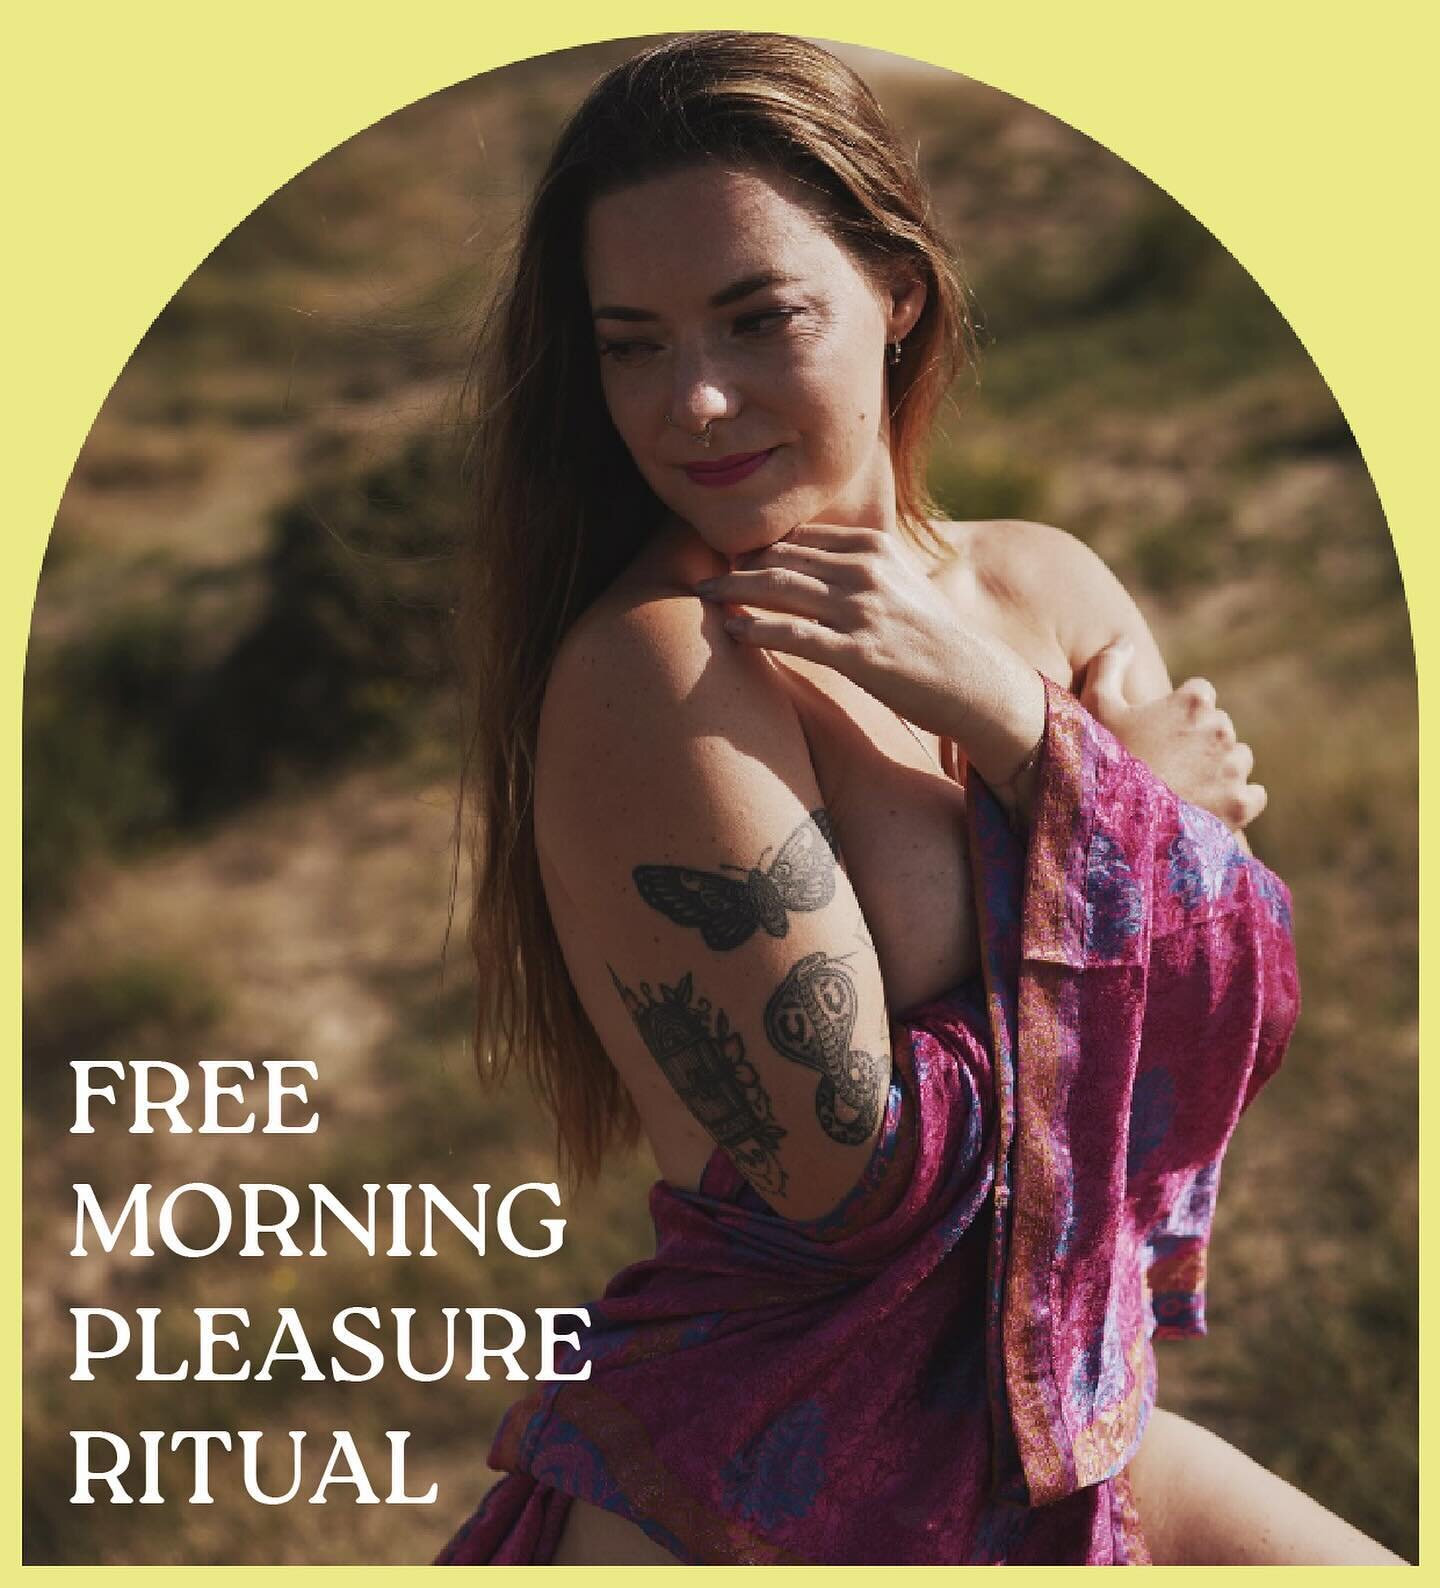 Here is my free 15 minute Morning Pleasure Ritual for you. You can use this ritual as a daily practice to connect more with your body, to give yourself loving attention and start your day with pleasure. This will nourish your body and calm your nervo